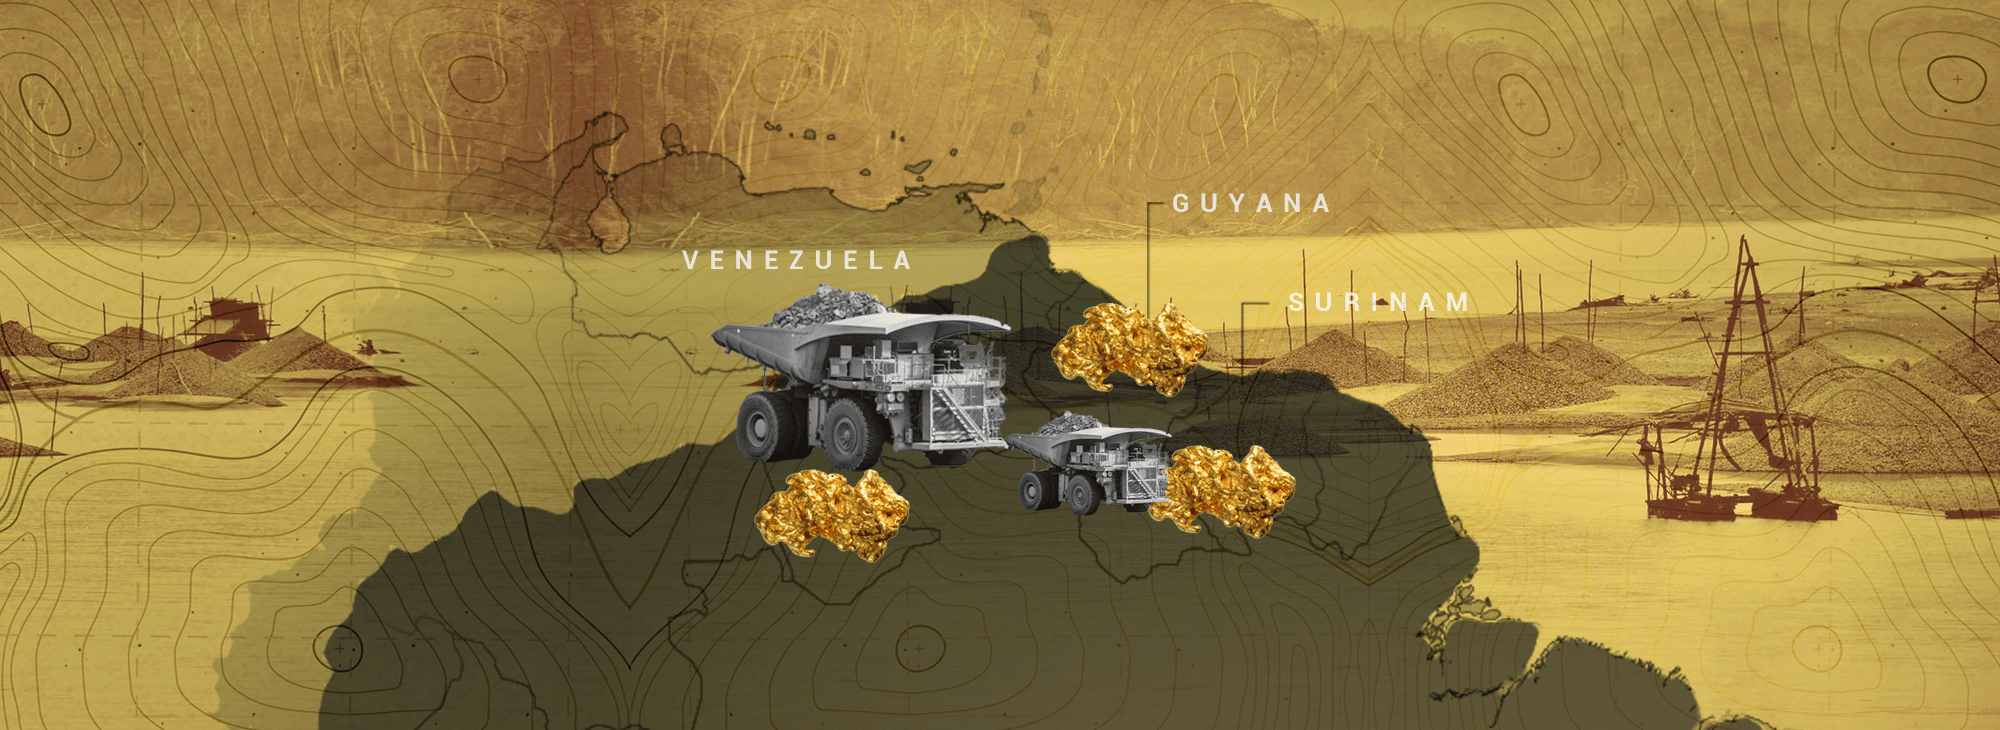 Map of Venezuela, Suriname, and Guyana with trucks carrying illegally mined material